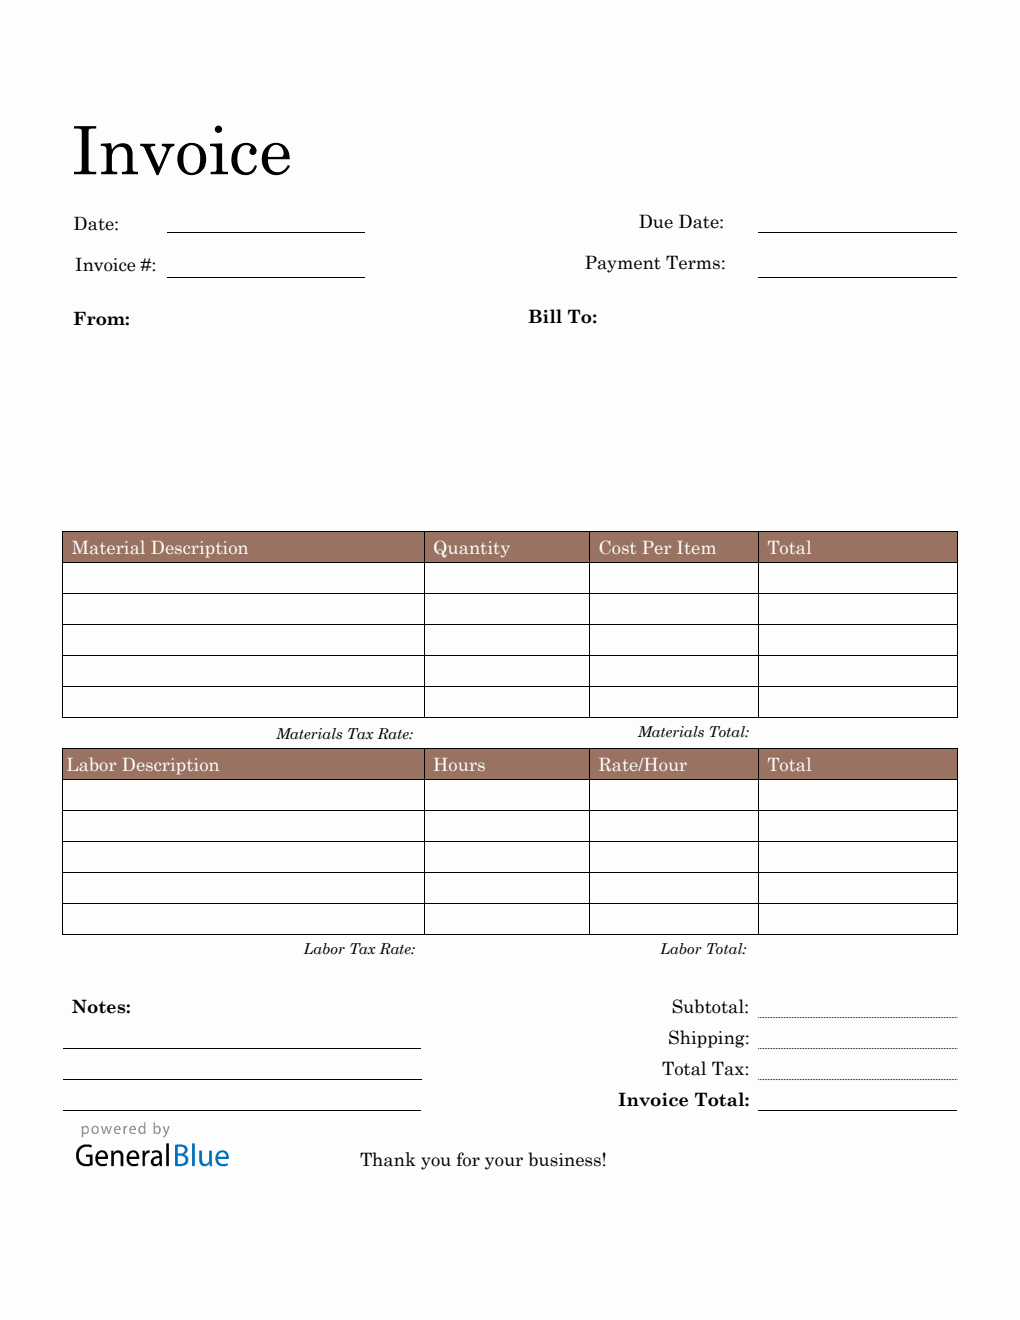 Construction Invoice Template in PDF (Basic)